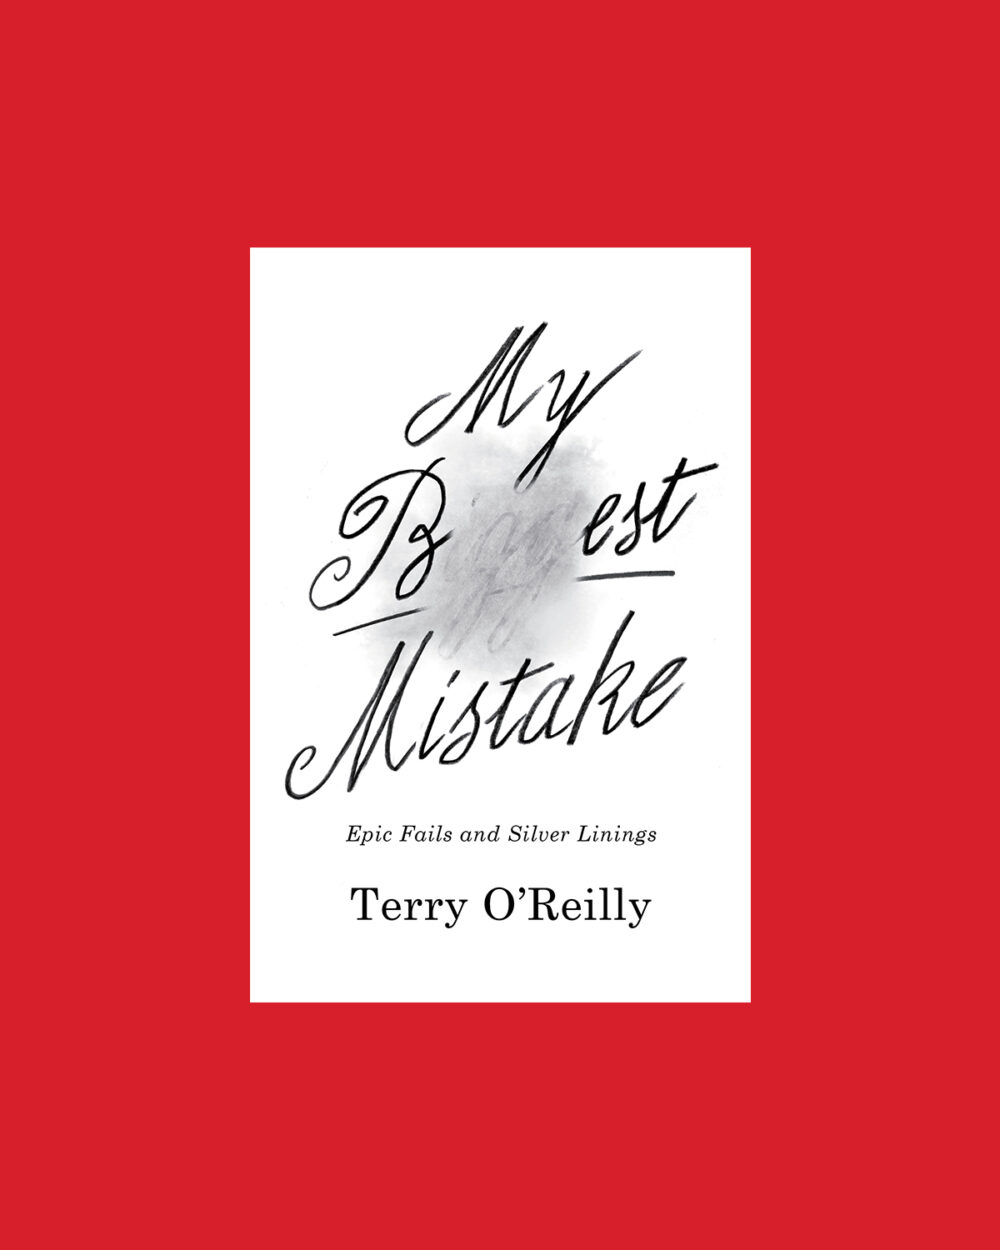 Shop our Summer Sale! – Terry O'Reilly